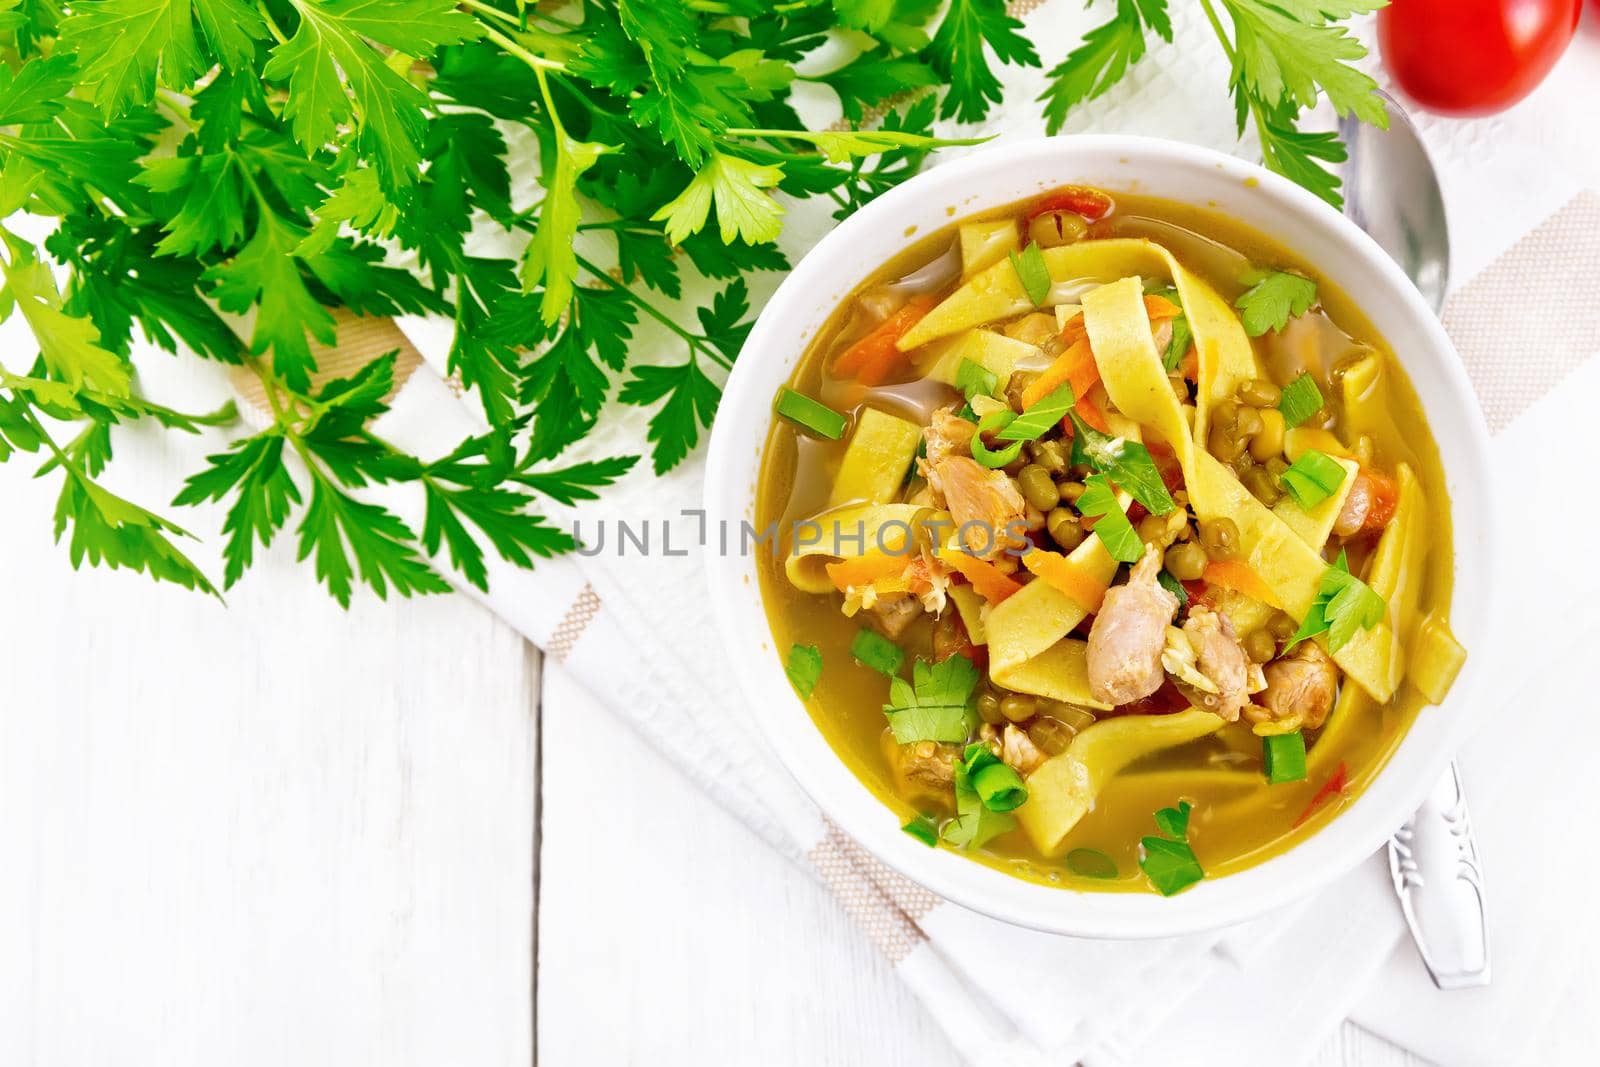 Soup with meat, tomatoes, vegetables, mung bean lentils and noodles in a bowl on napkin, parsley and a spoon on the background of light wooden board from above